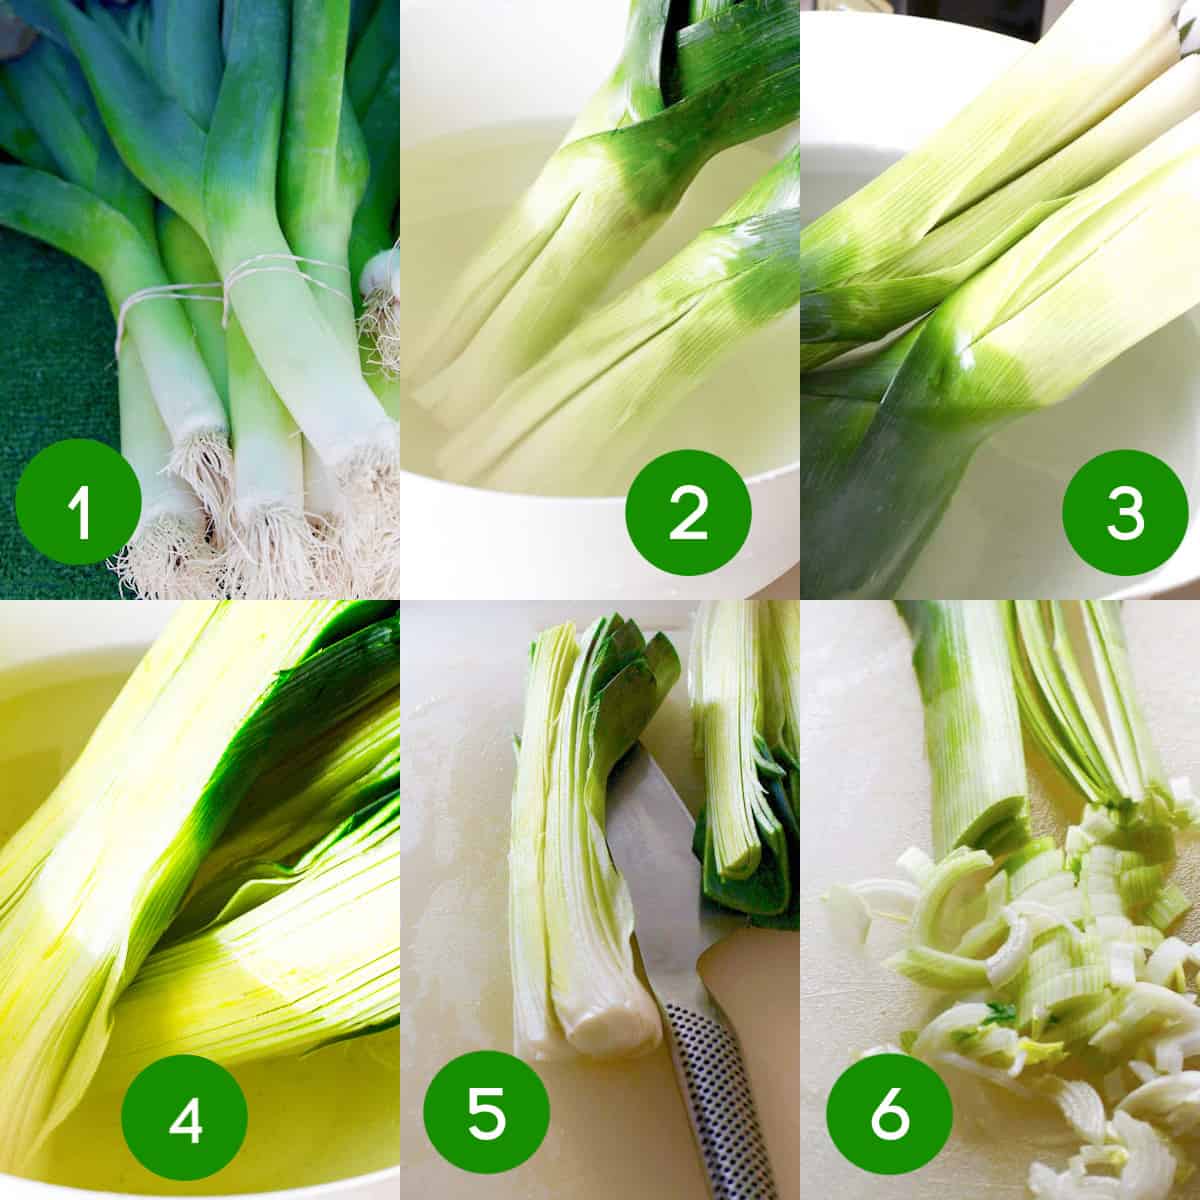 6 photos of leeks showing how to clean and slice them for use in recipes.